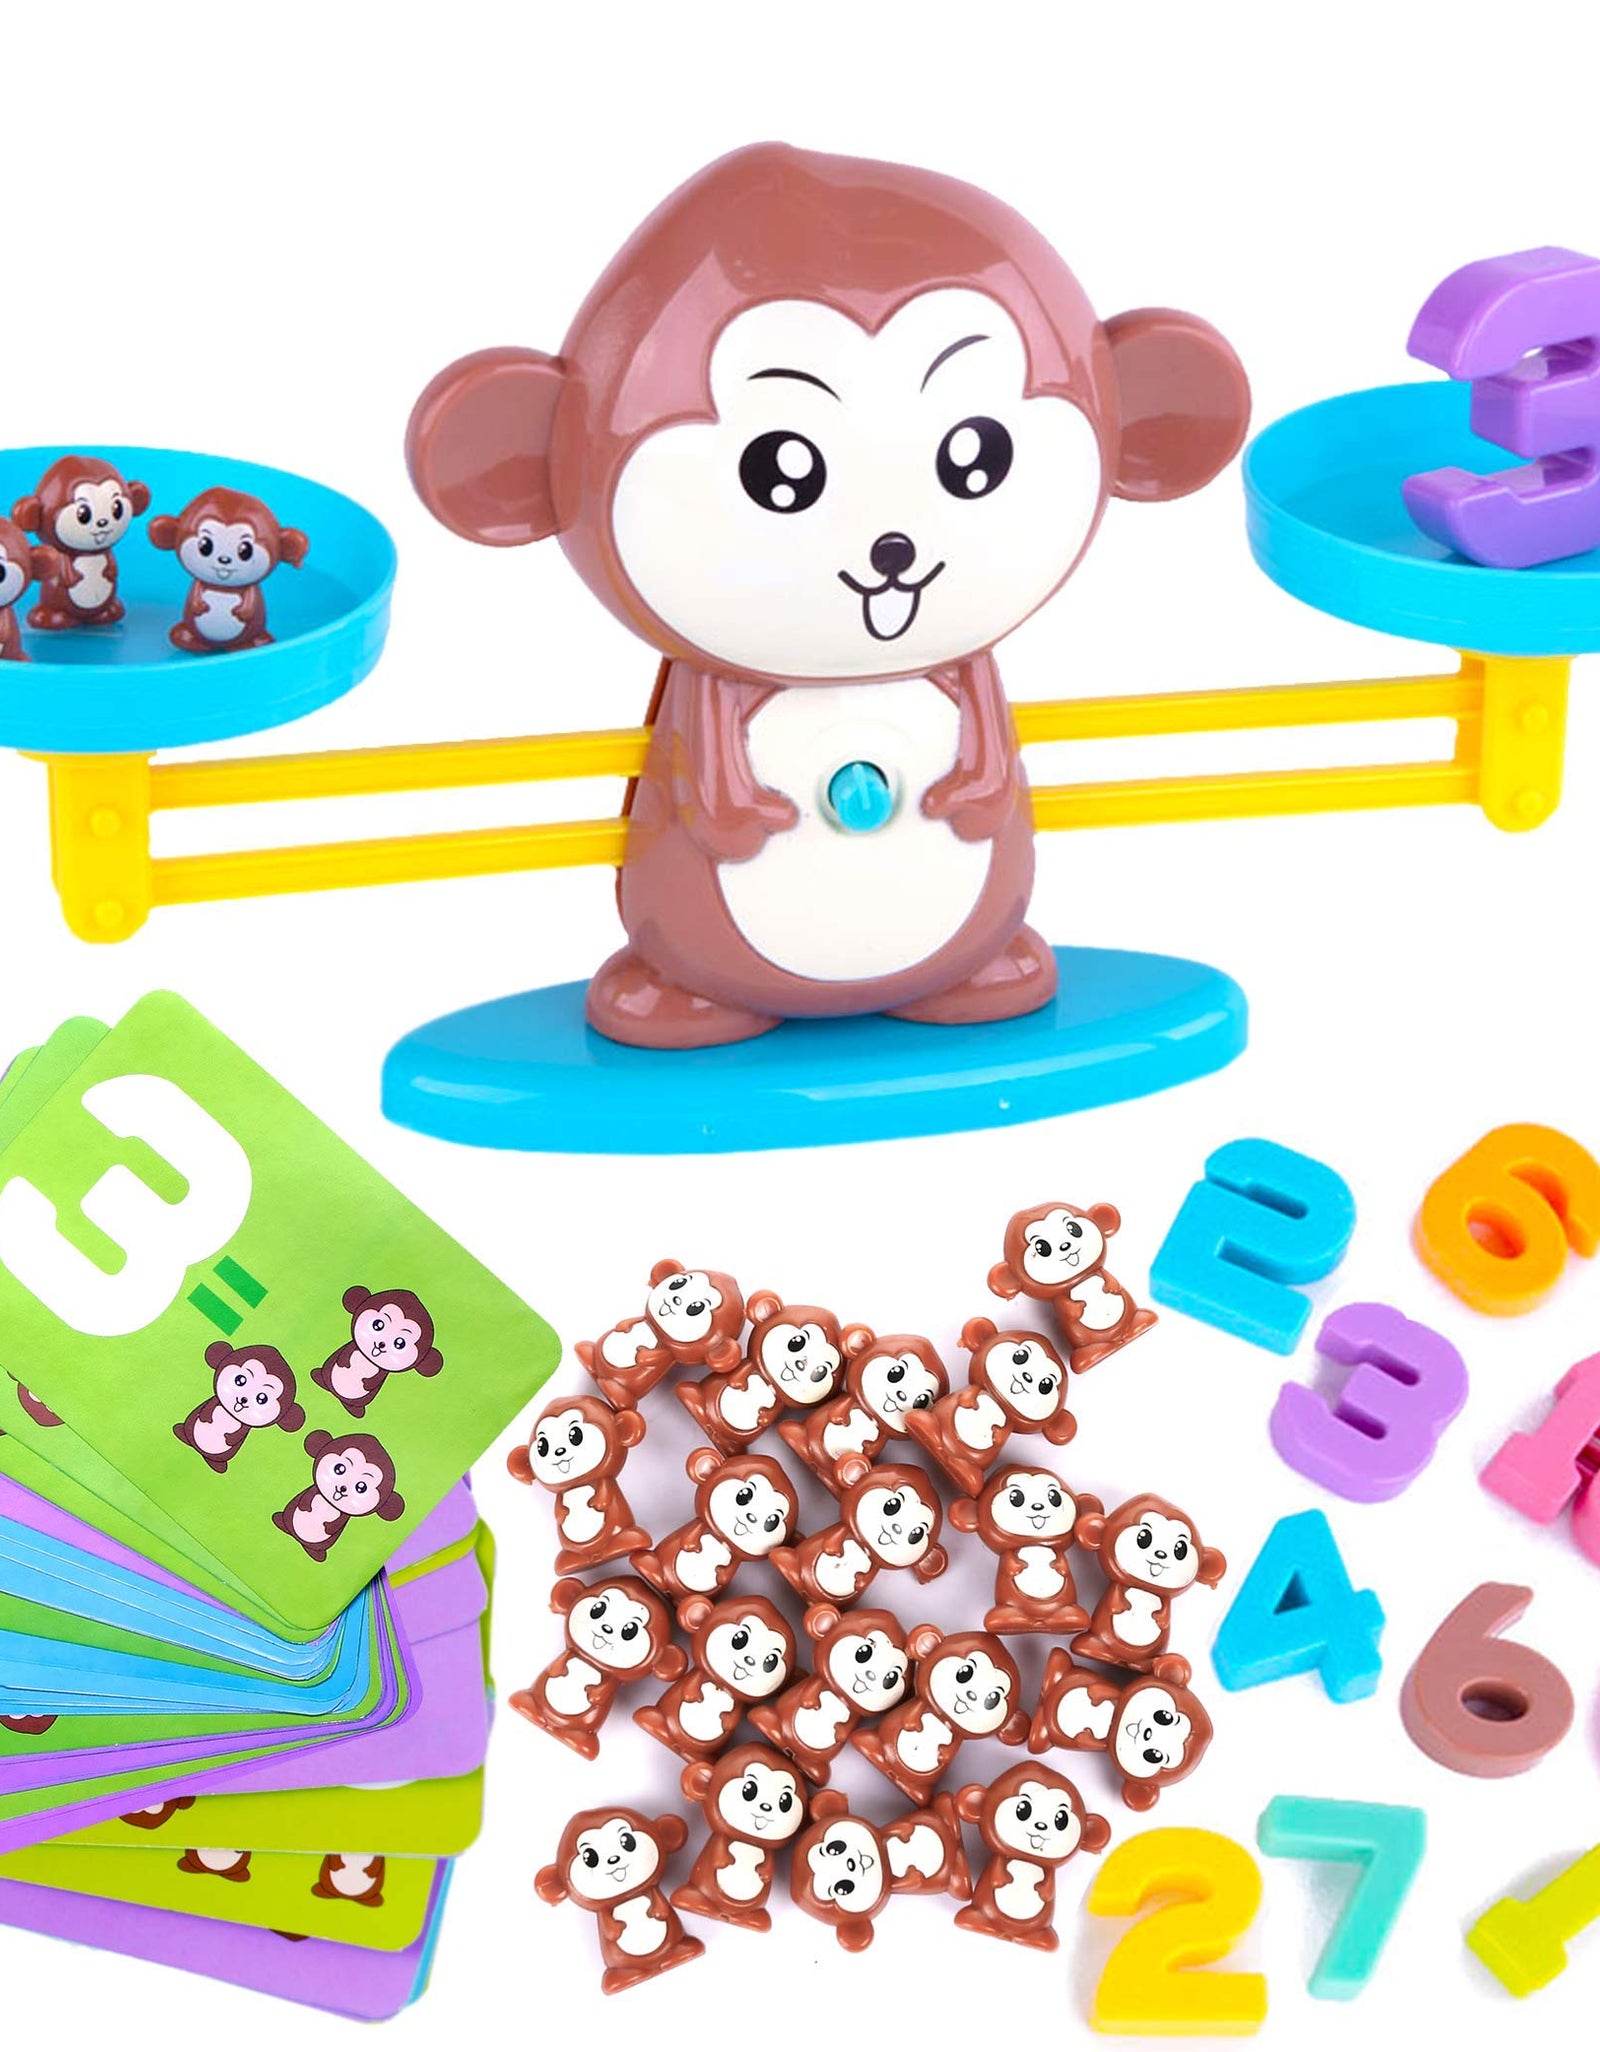 CoolToys Monkey Balance Cool Math Game for Girls & Boys | Fun, Educational Children's Gift & Kids Toy STEM Learning Ages 3+ (64-Piece Set)